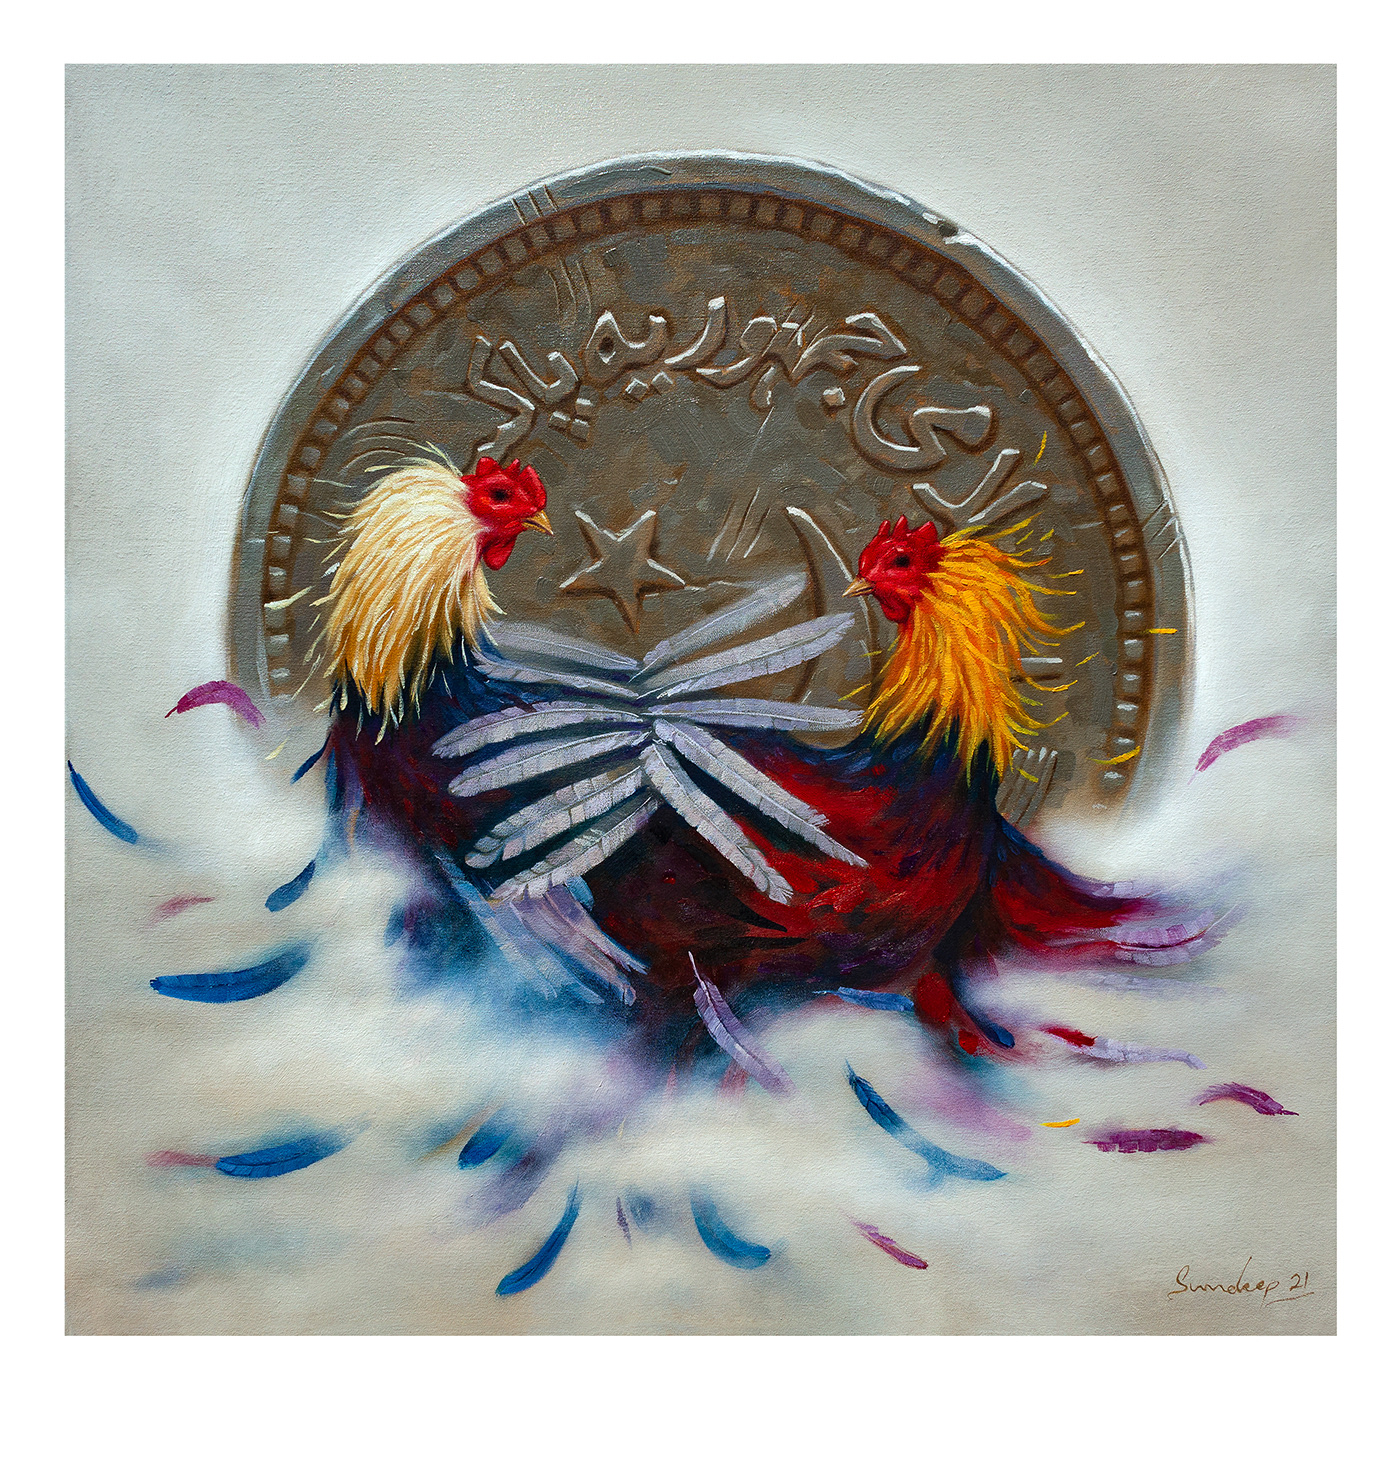 currency oil on canvas painting   pakistani Rooster sundeepartist